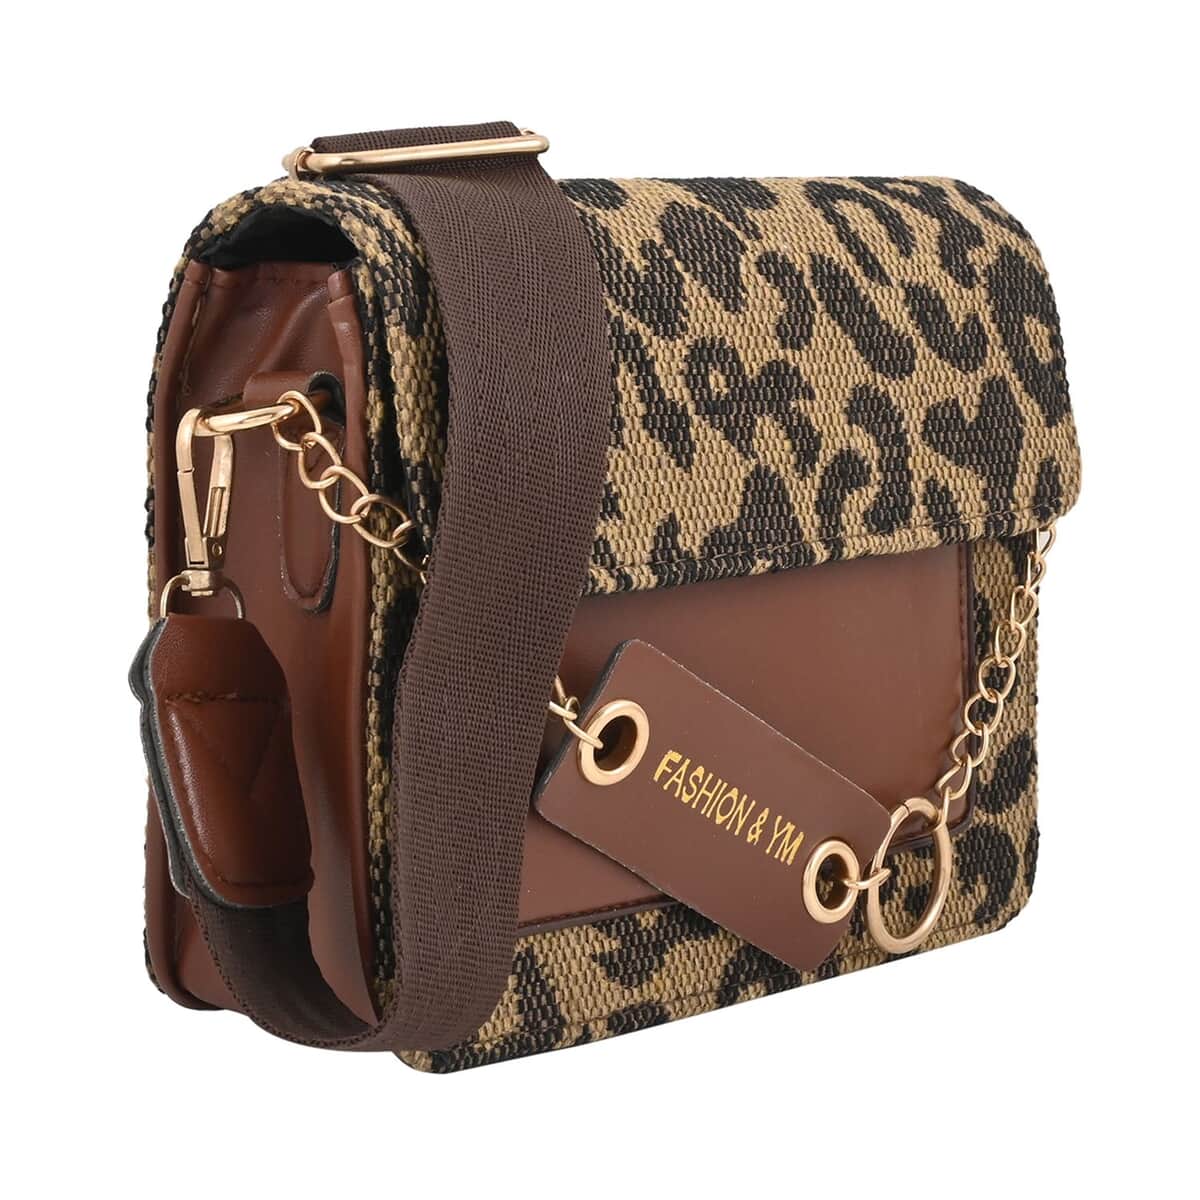 Buy Brown Leopard Pattern Faux Leather Crossbody Bag at ShopLC.